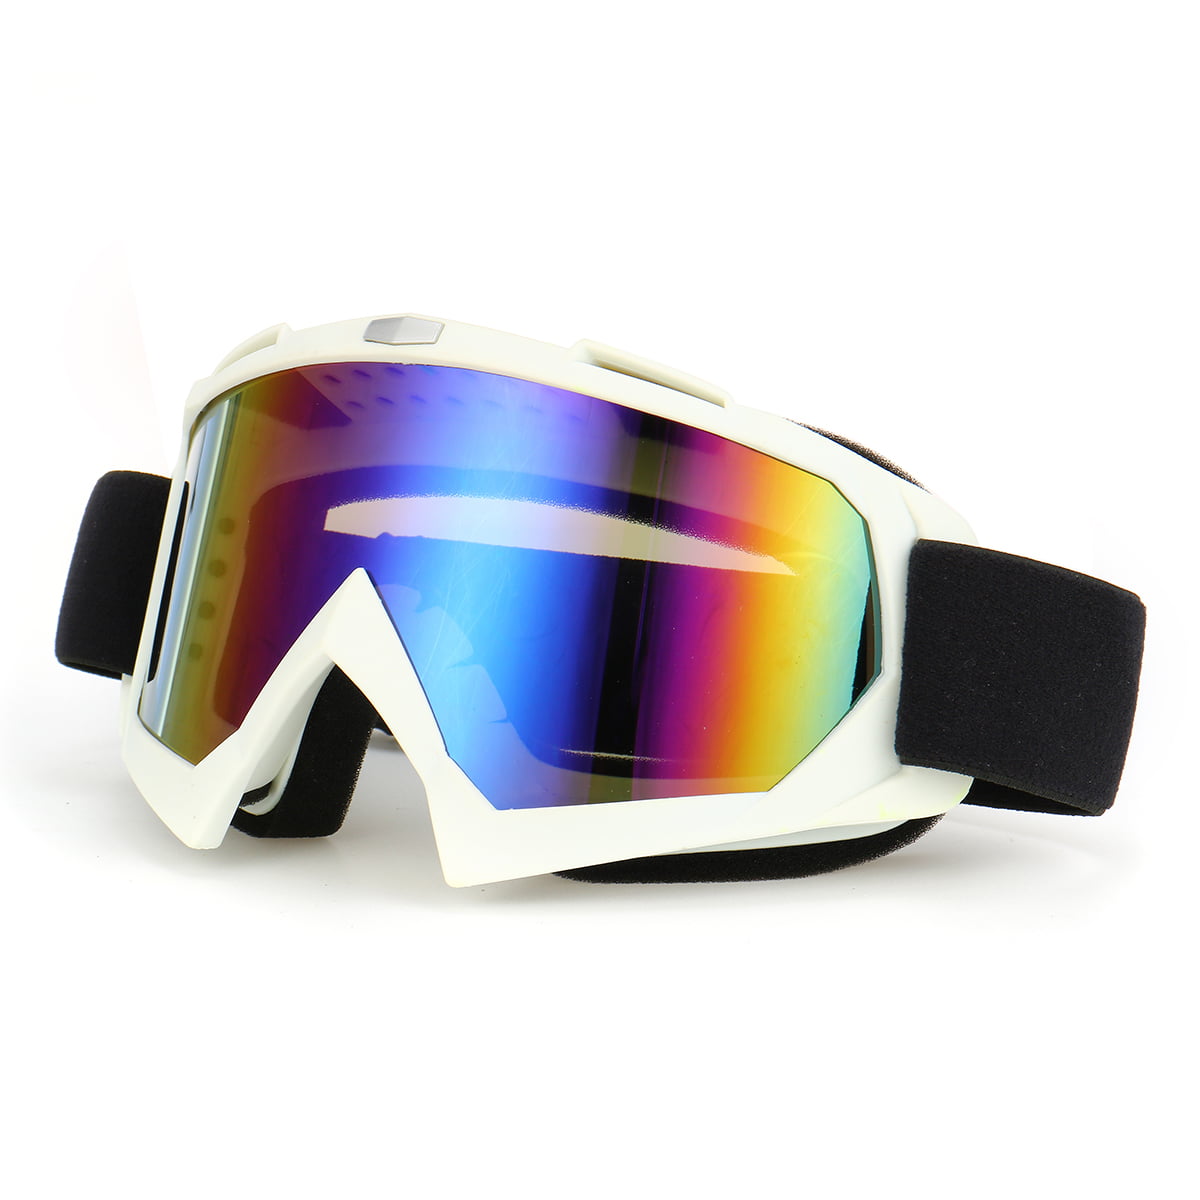 Ski Goggles For Snowmobile Snowboarding Pro Cycling Snow Glasses With UV lenses. 